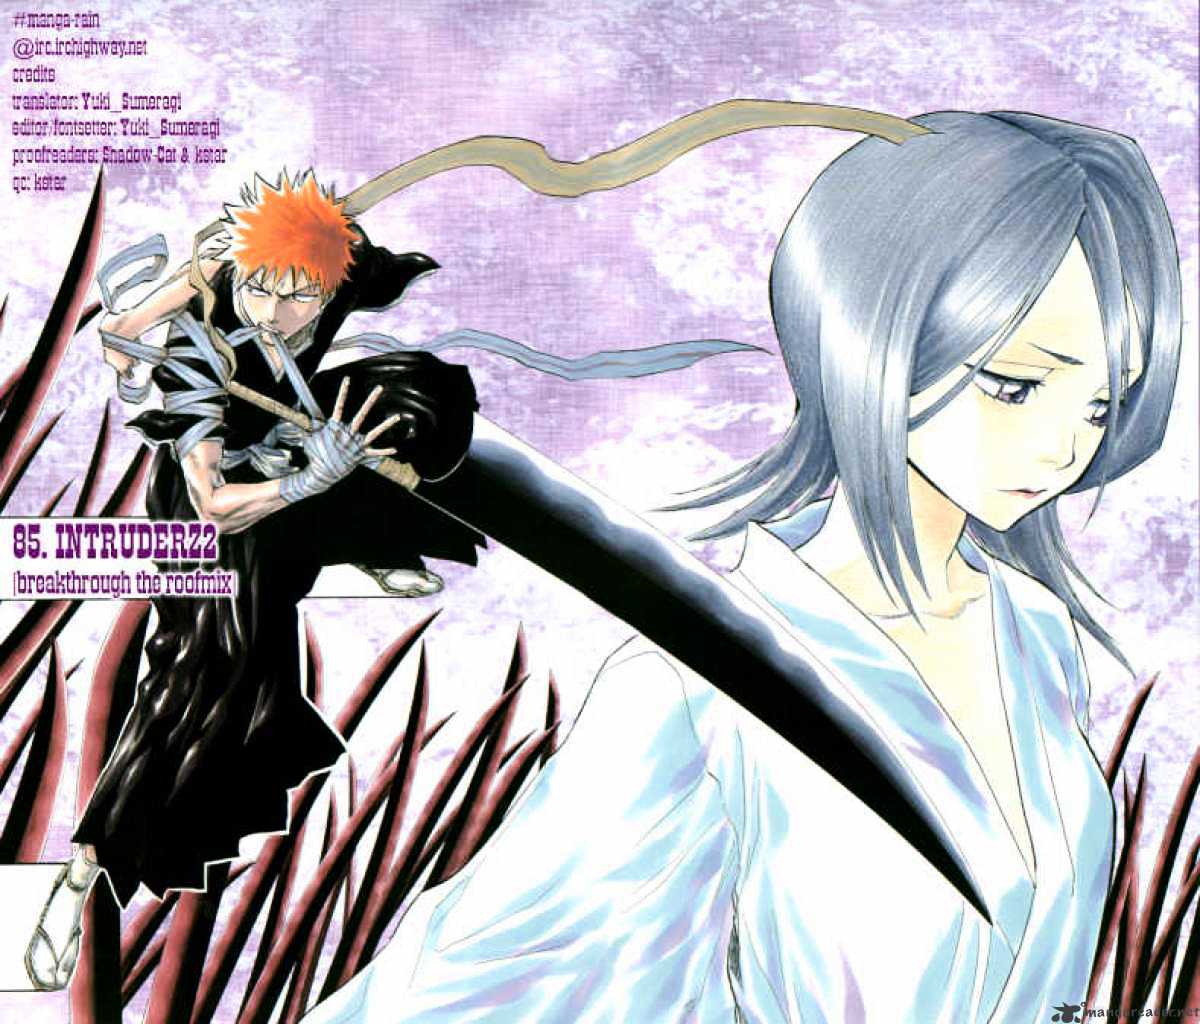 Bleach Chapter 85 : Intruderz 2 Breakthrough The Roof Mix - Picture 2